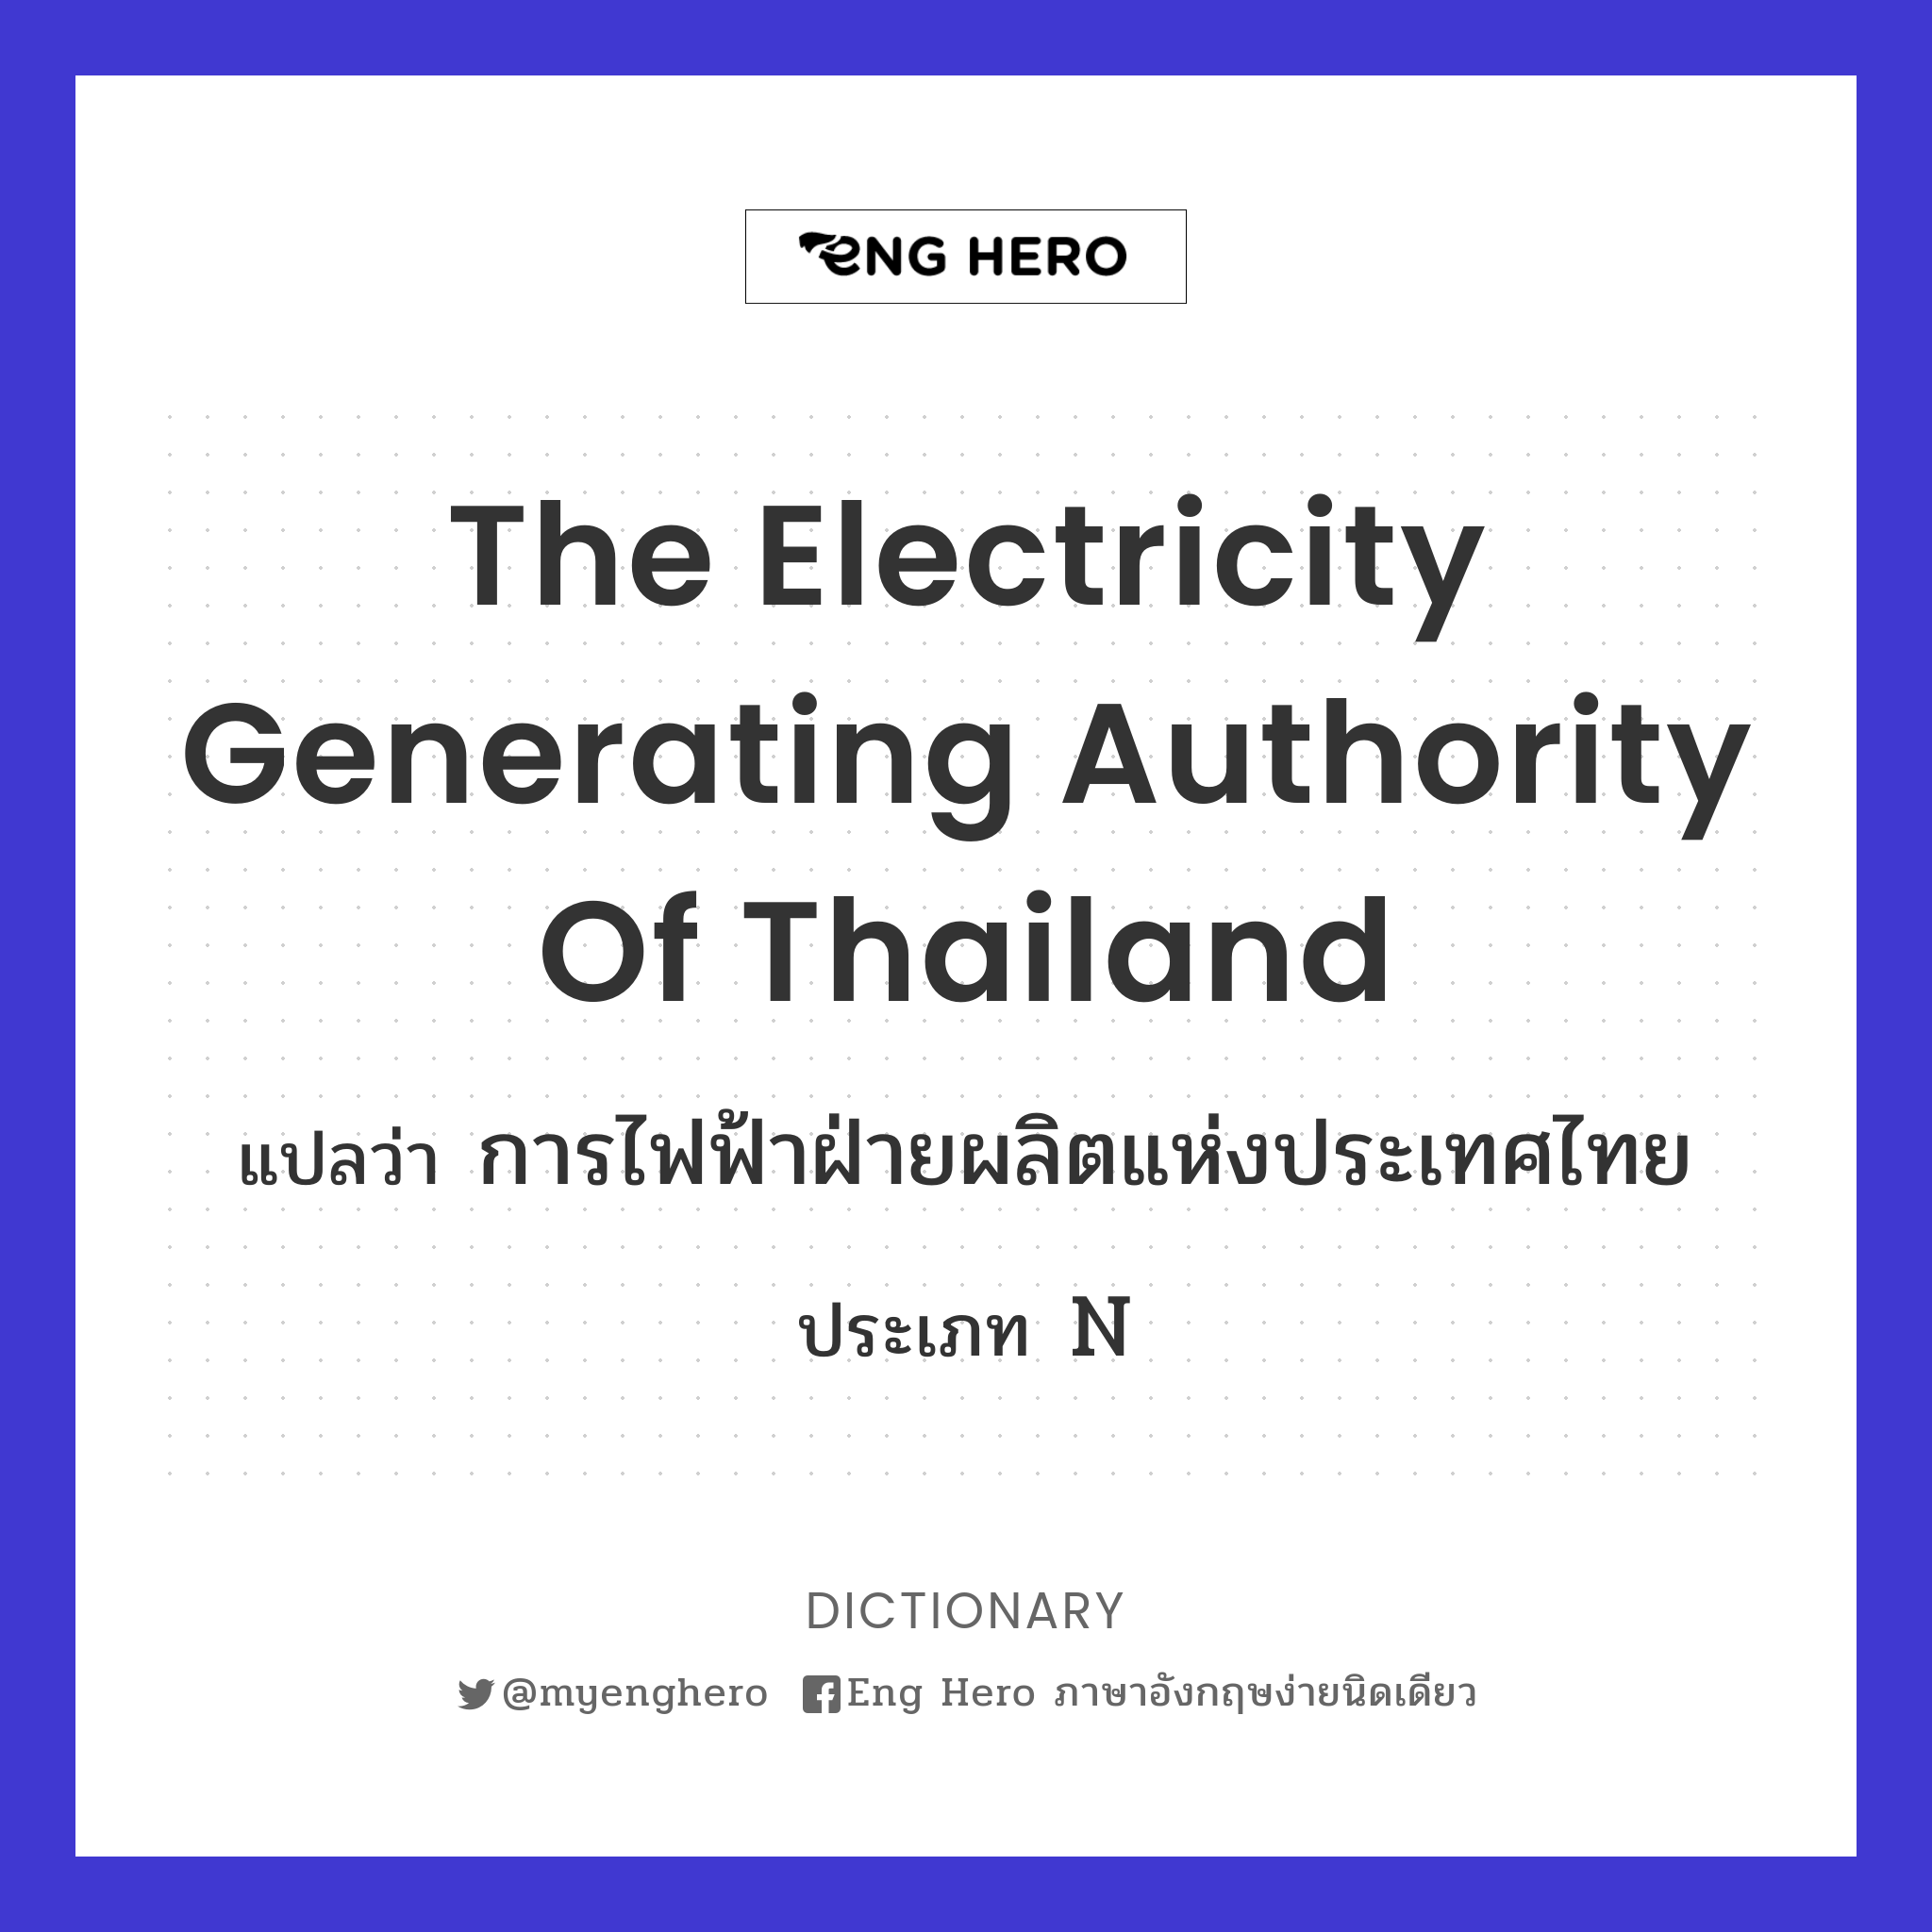 The Electricity Generating Authority of Thailand